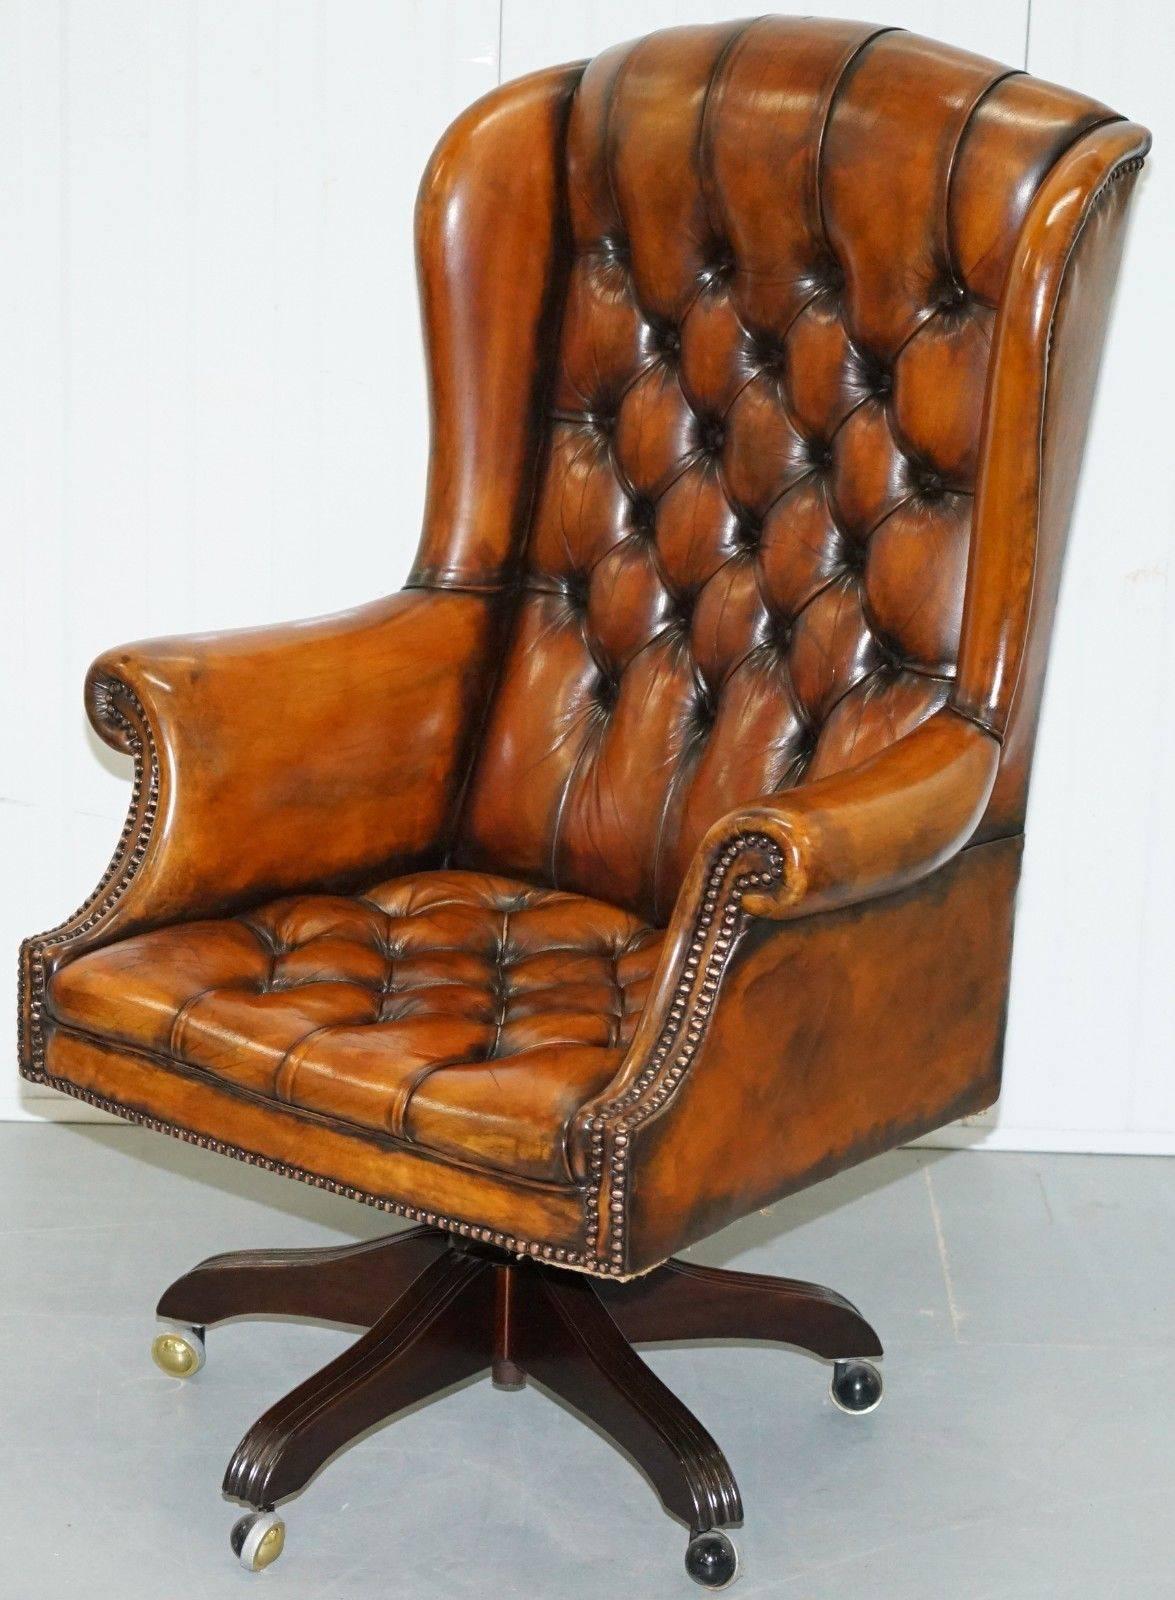 We are delighted to offer for sale this stunning pair of very rare fully restored hand dyed Whisky brown leather Chesterfield wingback office swivel armchairs

This auction is for the one chair with the option to buy the pair, so the price is per